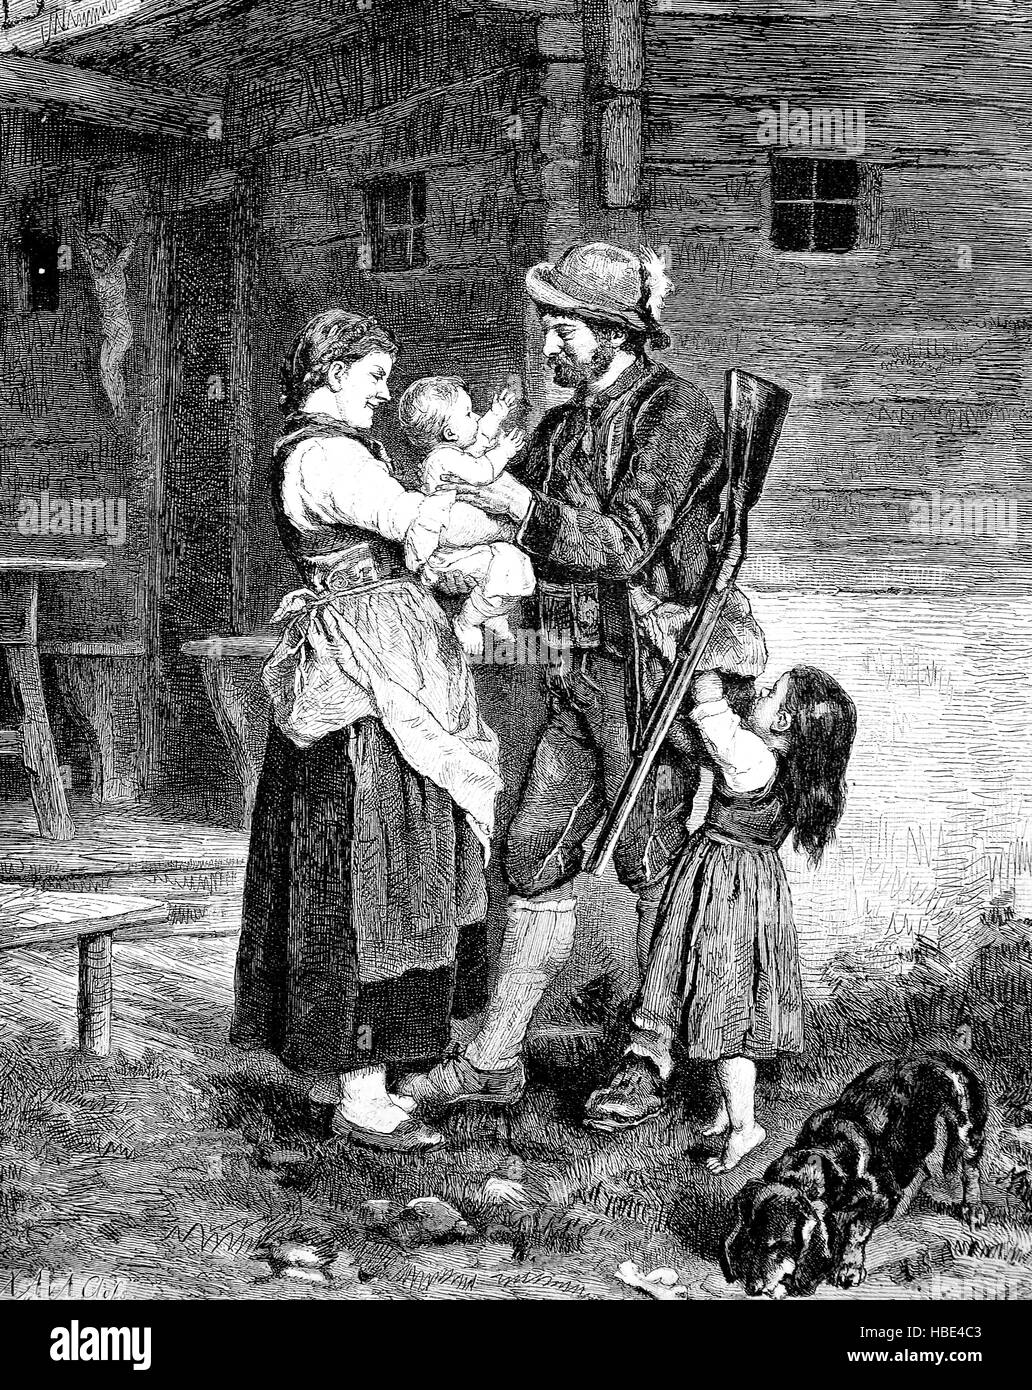 Happy homecoming of the hunter to wife and family, illustration, woodcut from 1880 Stock Photo